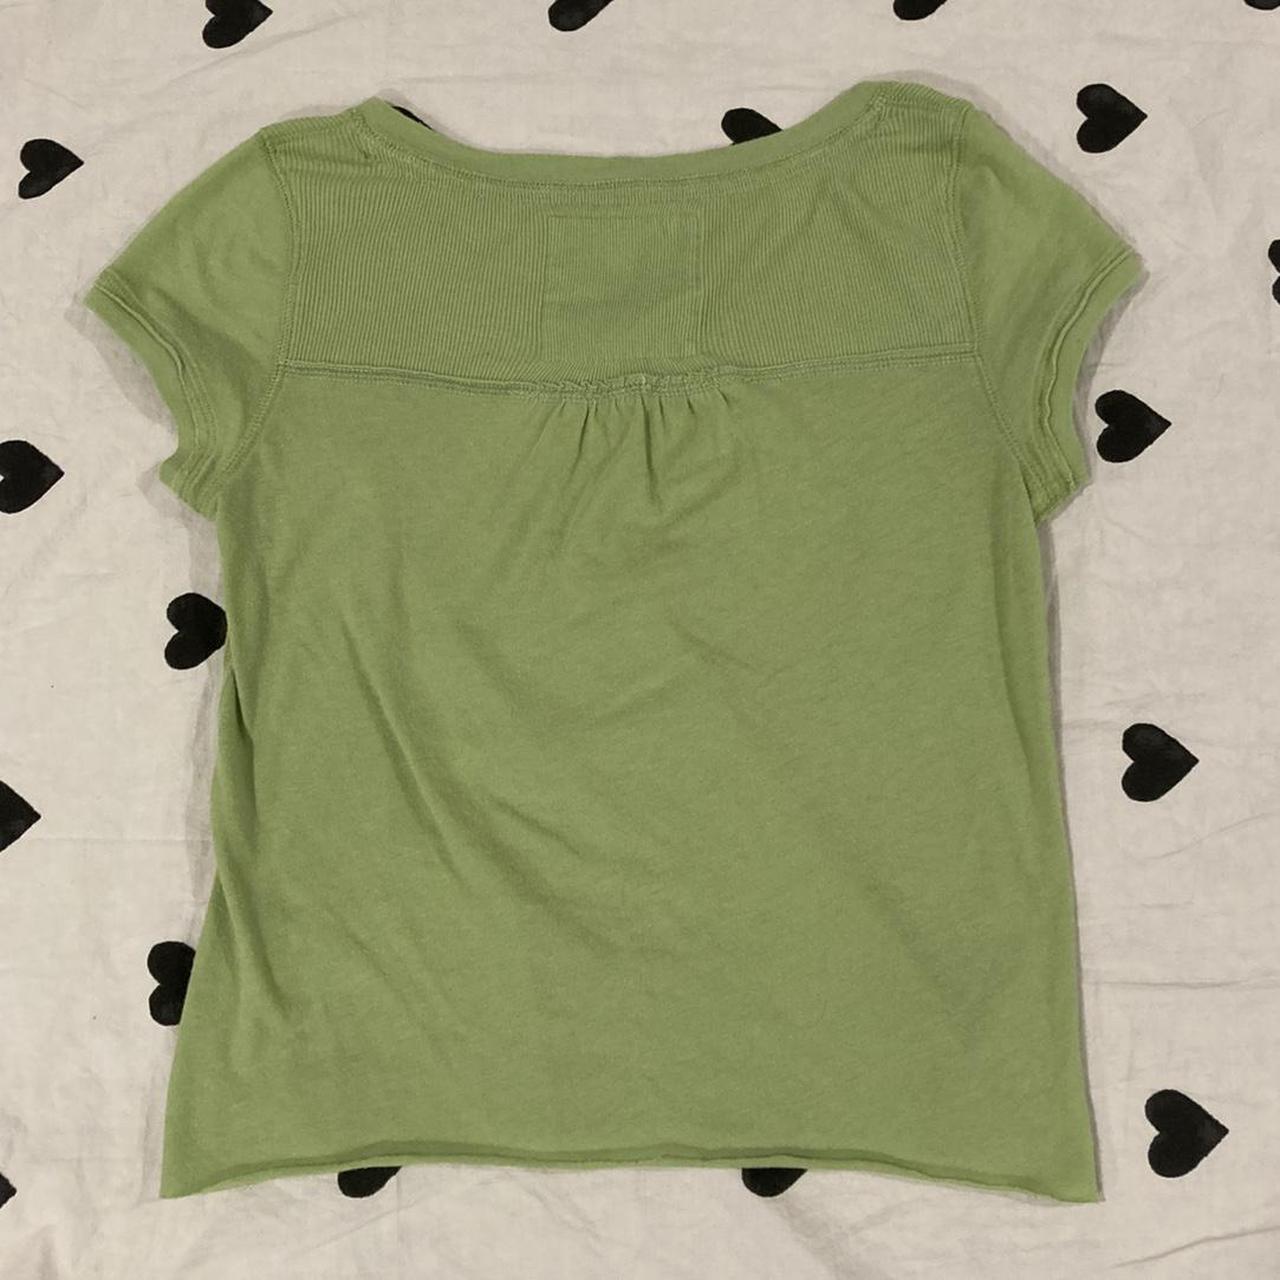 Product Image 2 - Abercrombie and Fitch green crop